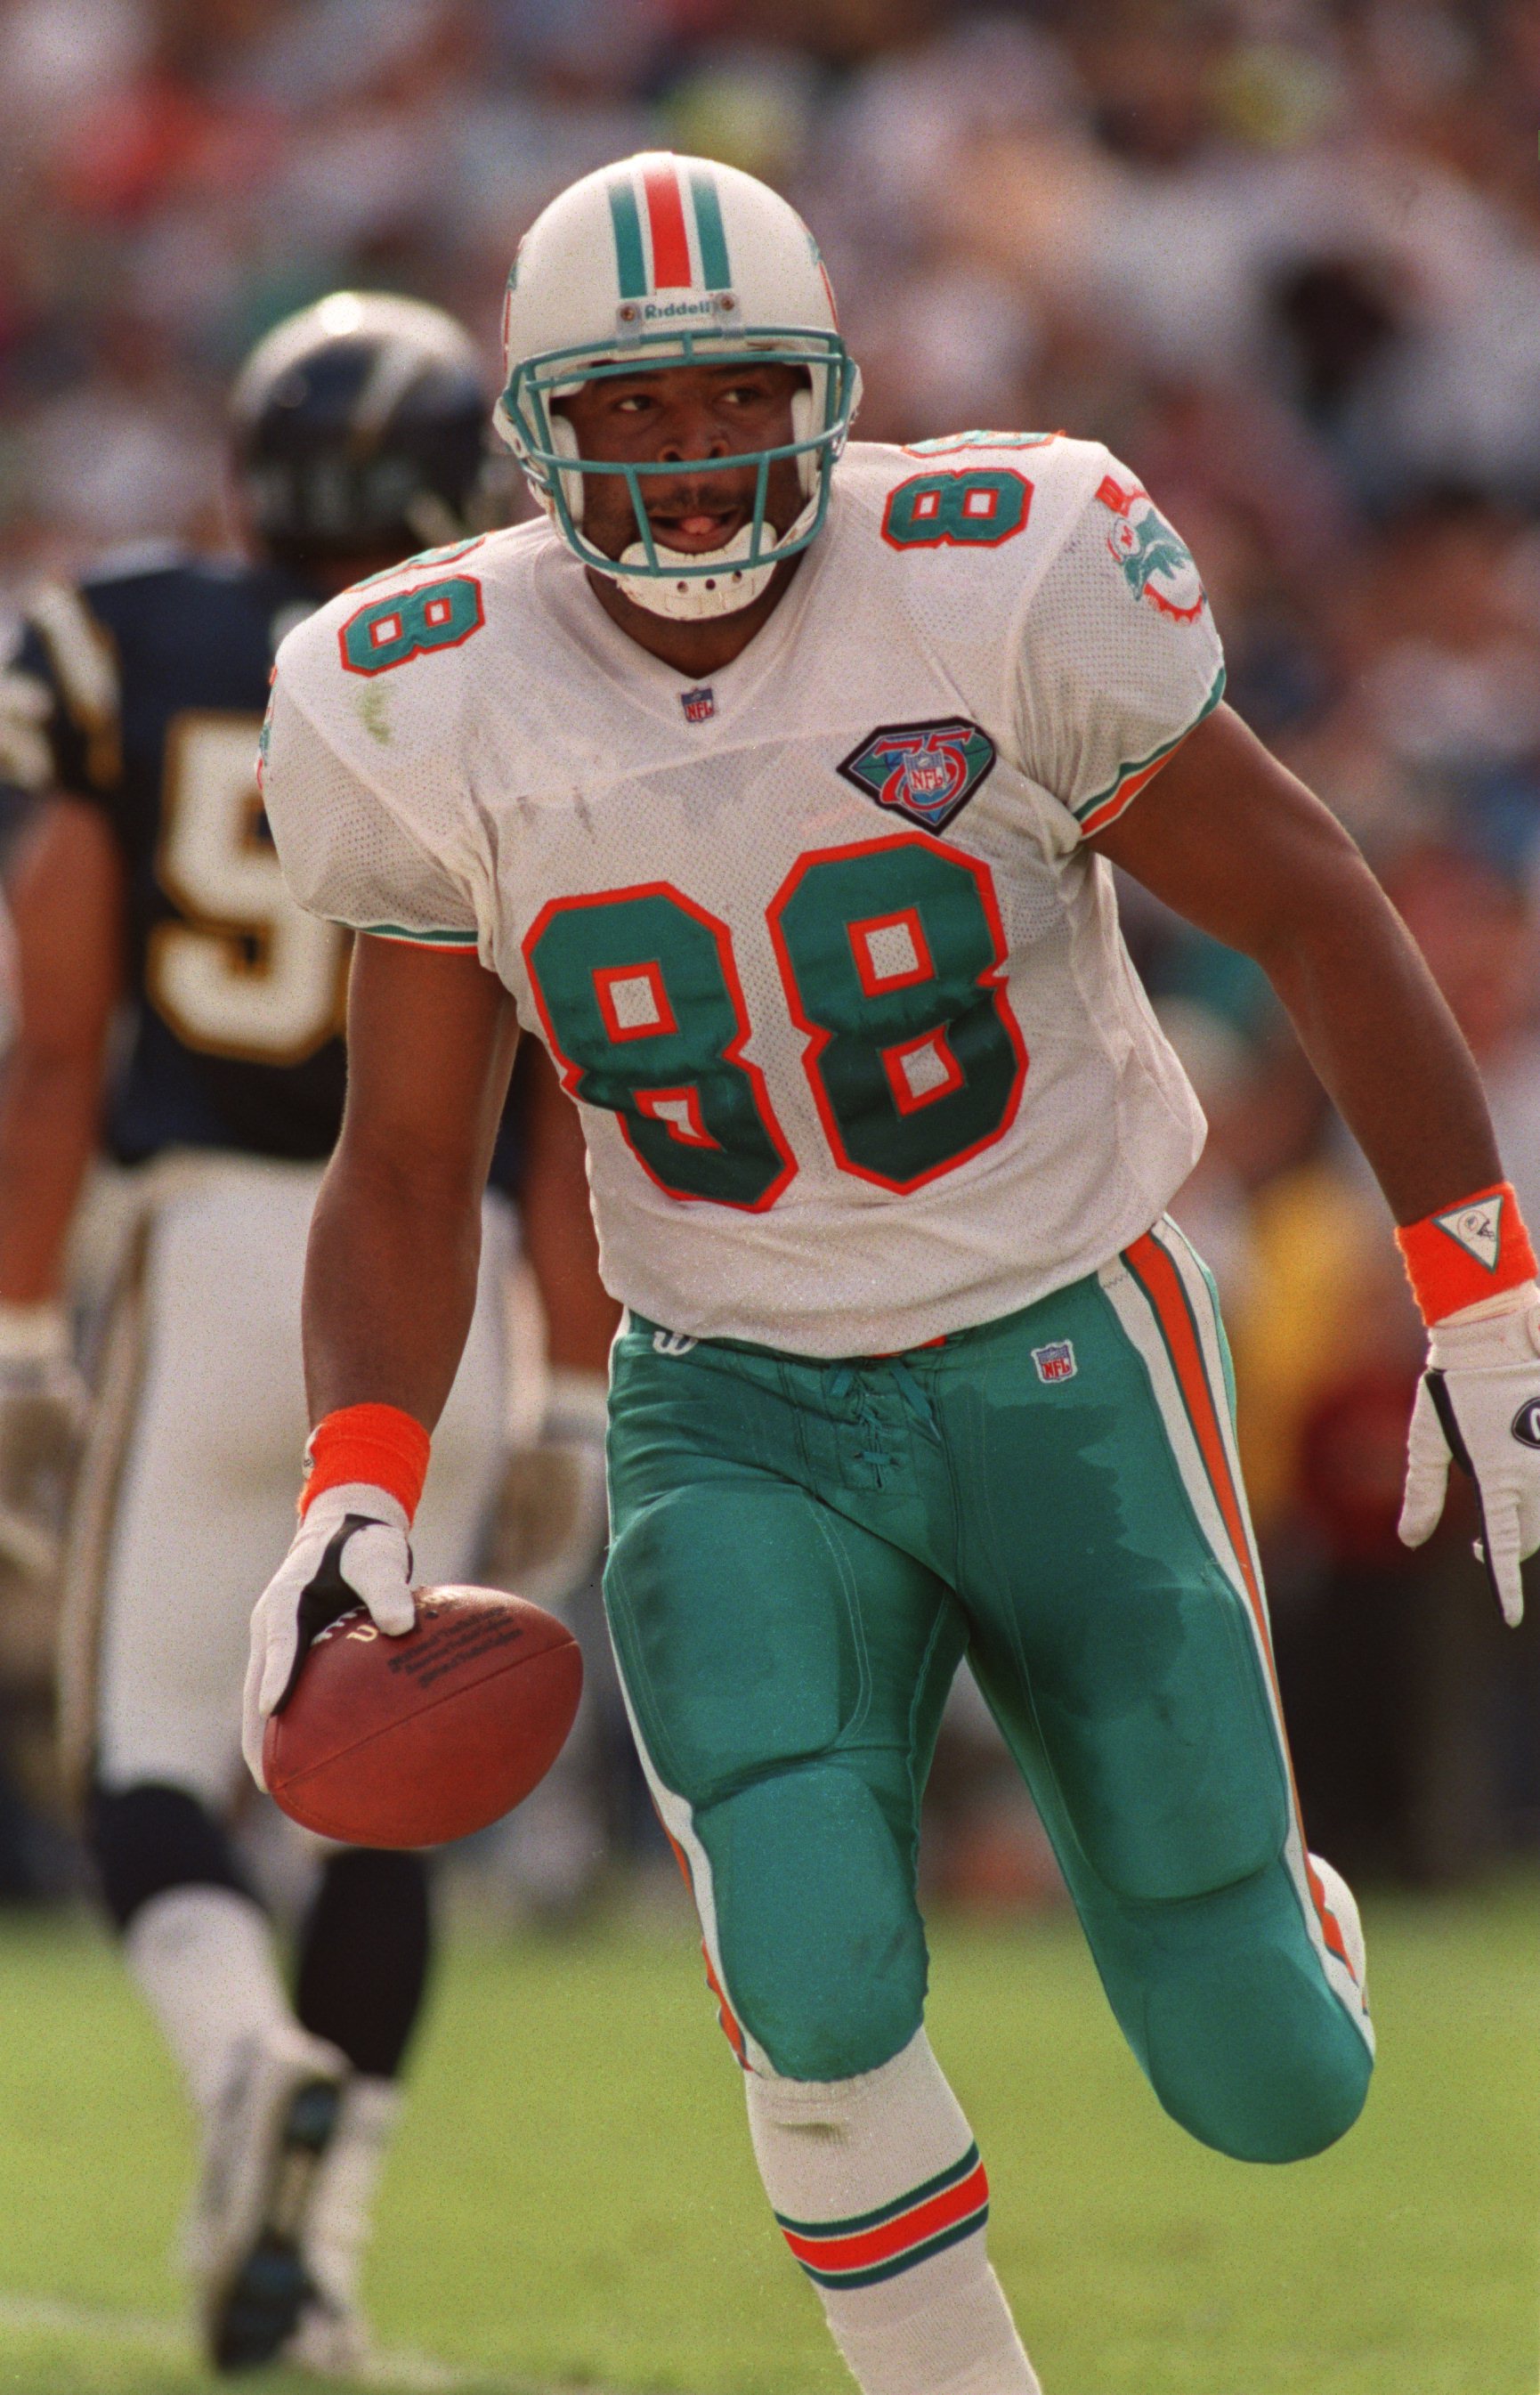 8 Jan 1995: MIAMI TIGHT END KEITH JACKSON FOLLOWING A CATCH DURING THE DOLPHINS 22-21 LOSS TO THE SAN DIEGO CHARGERS IN AN AFC PLAYOFF GAME AT JACK MURPHY STADIUM IN SAN DIEGO, CALIFORNIA.